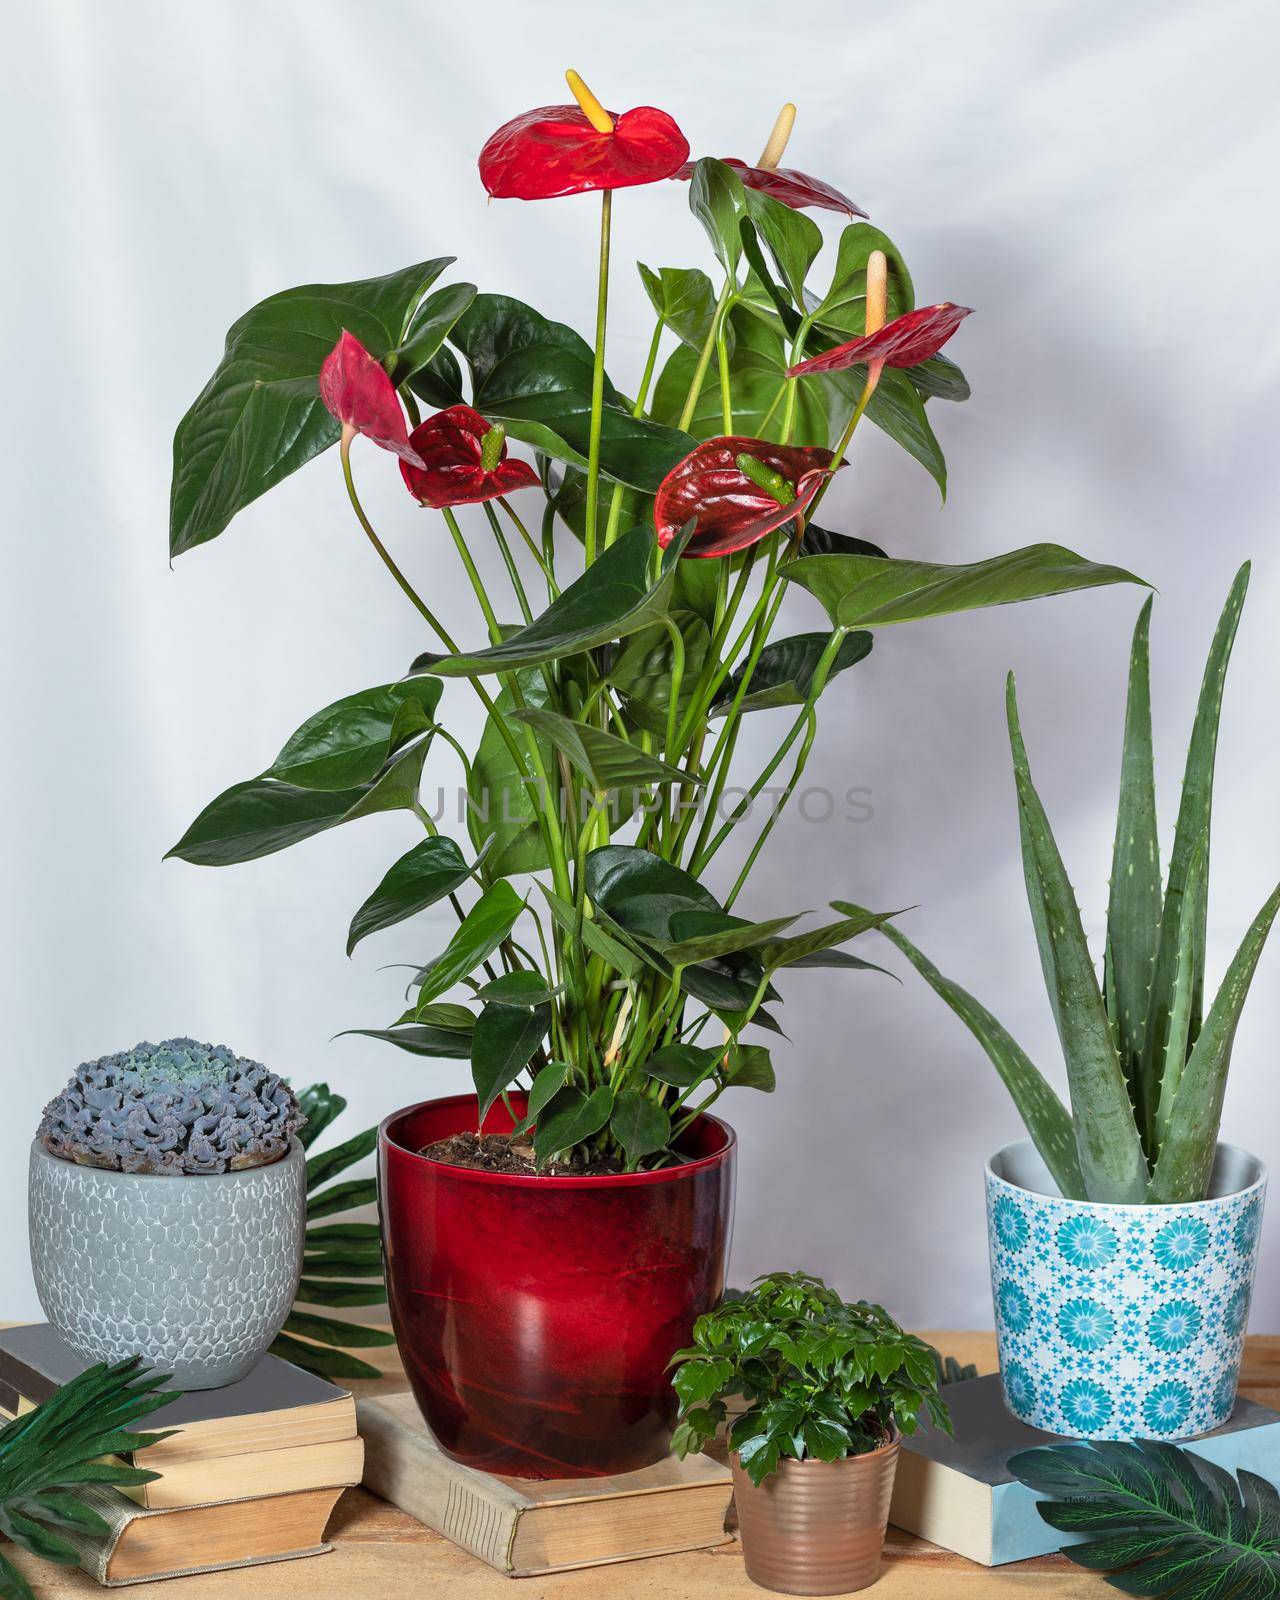 Red Anthurium Laceleaf in the red pot with, aloe vera, succulent